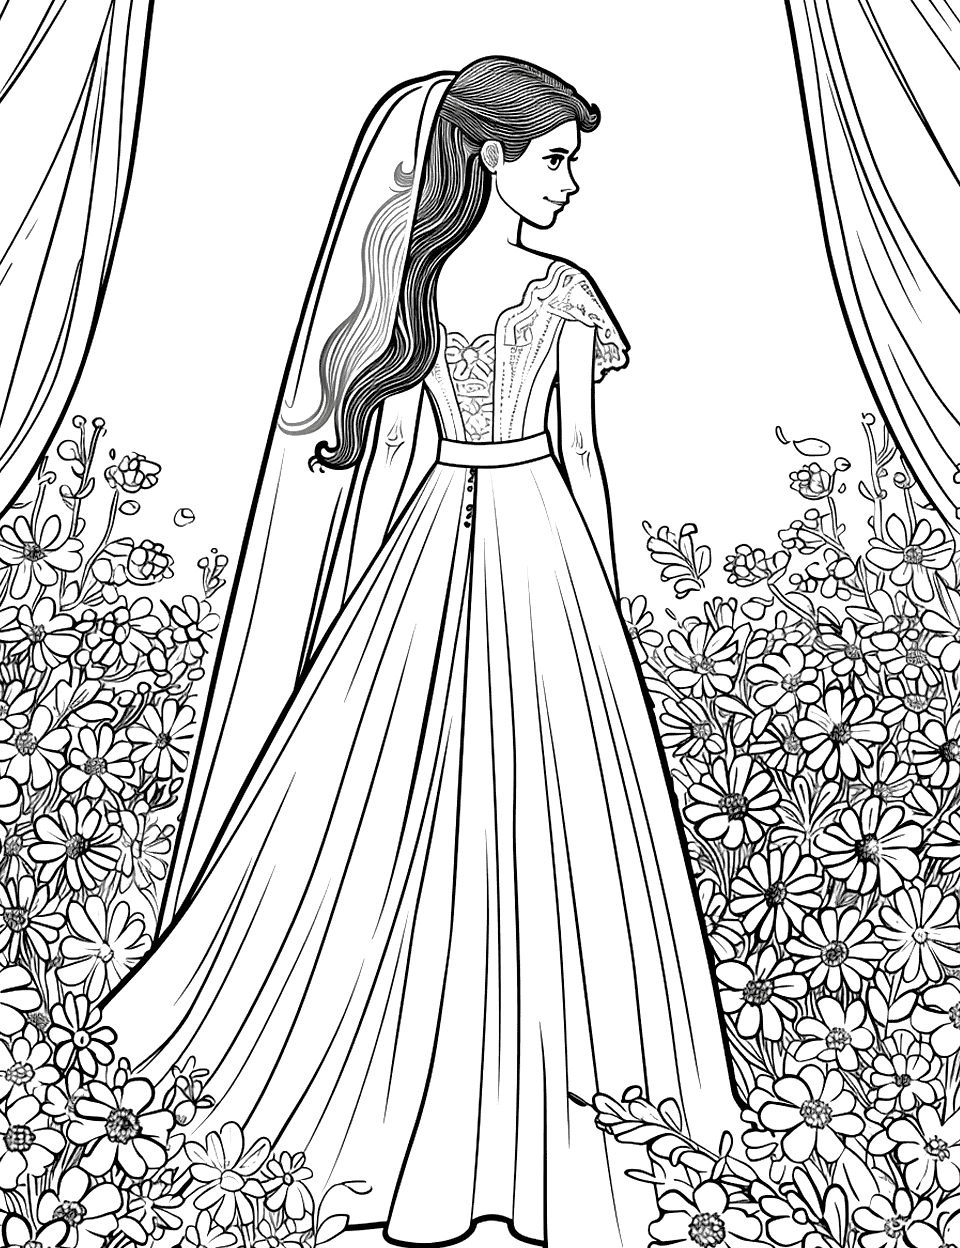 Bride Walking Down the Aisle Wedding Coloring Page - A bride in a flowing dress with a long veil, walking down a flower-lined aisle.